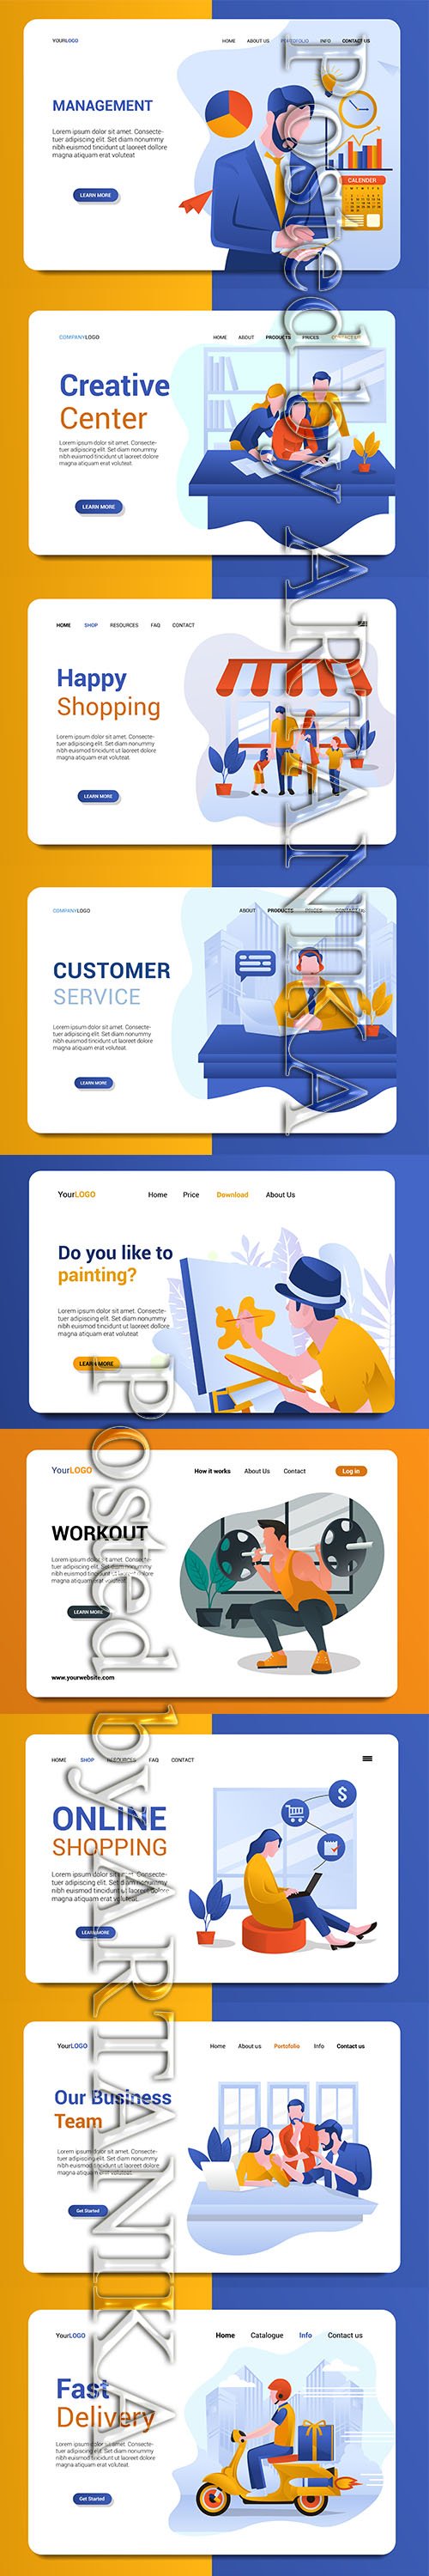 Business Template Set - Landing Page Backgrounds Vol 2